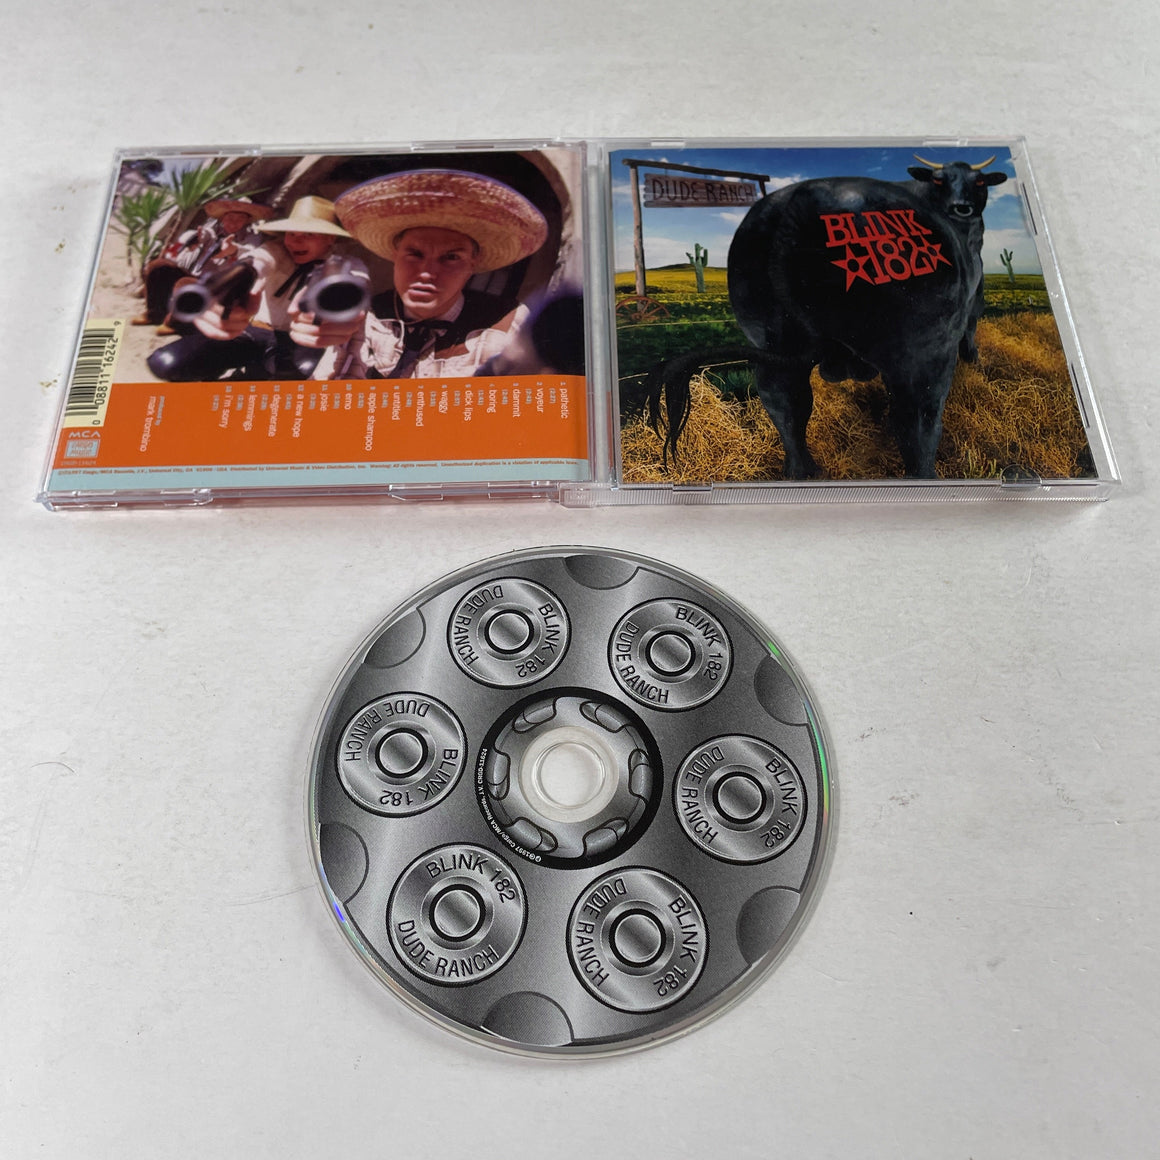 Blink-182 Dude Ranch Used CD VG+\VG+